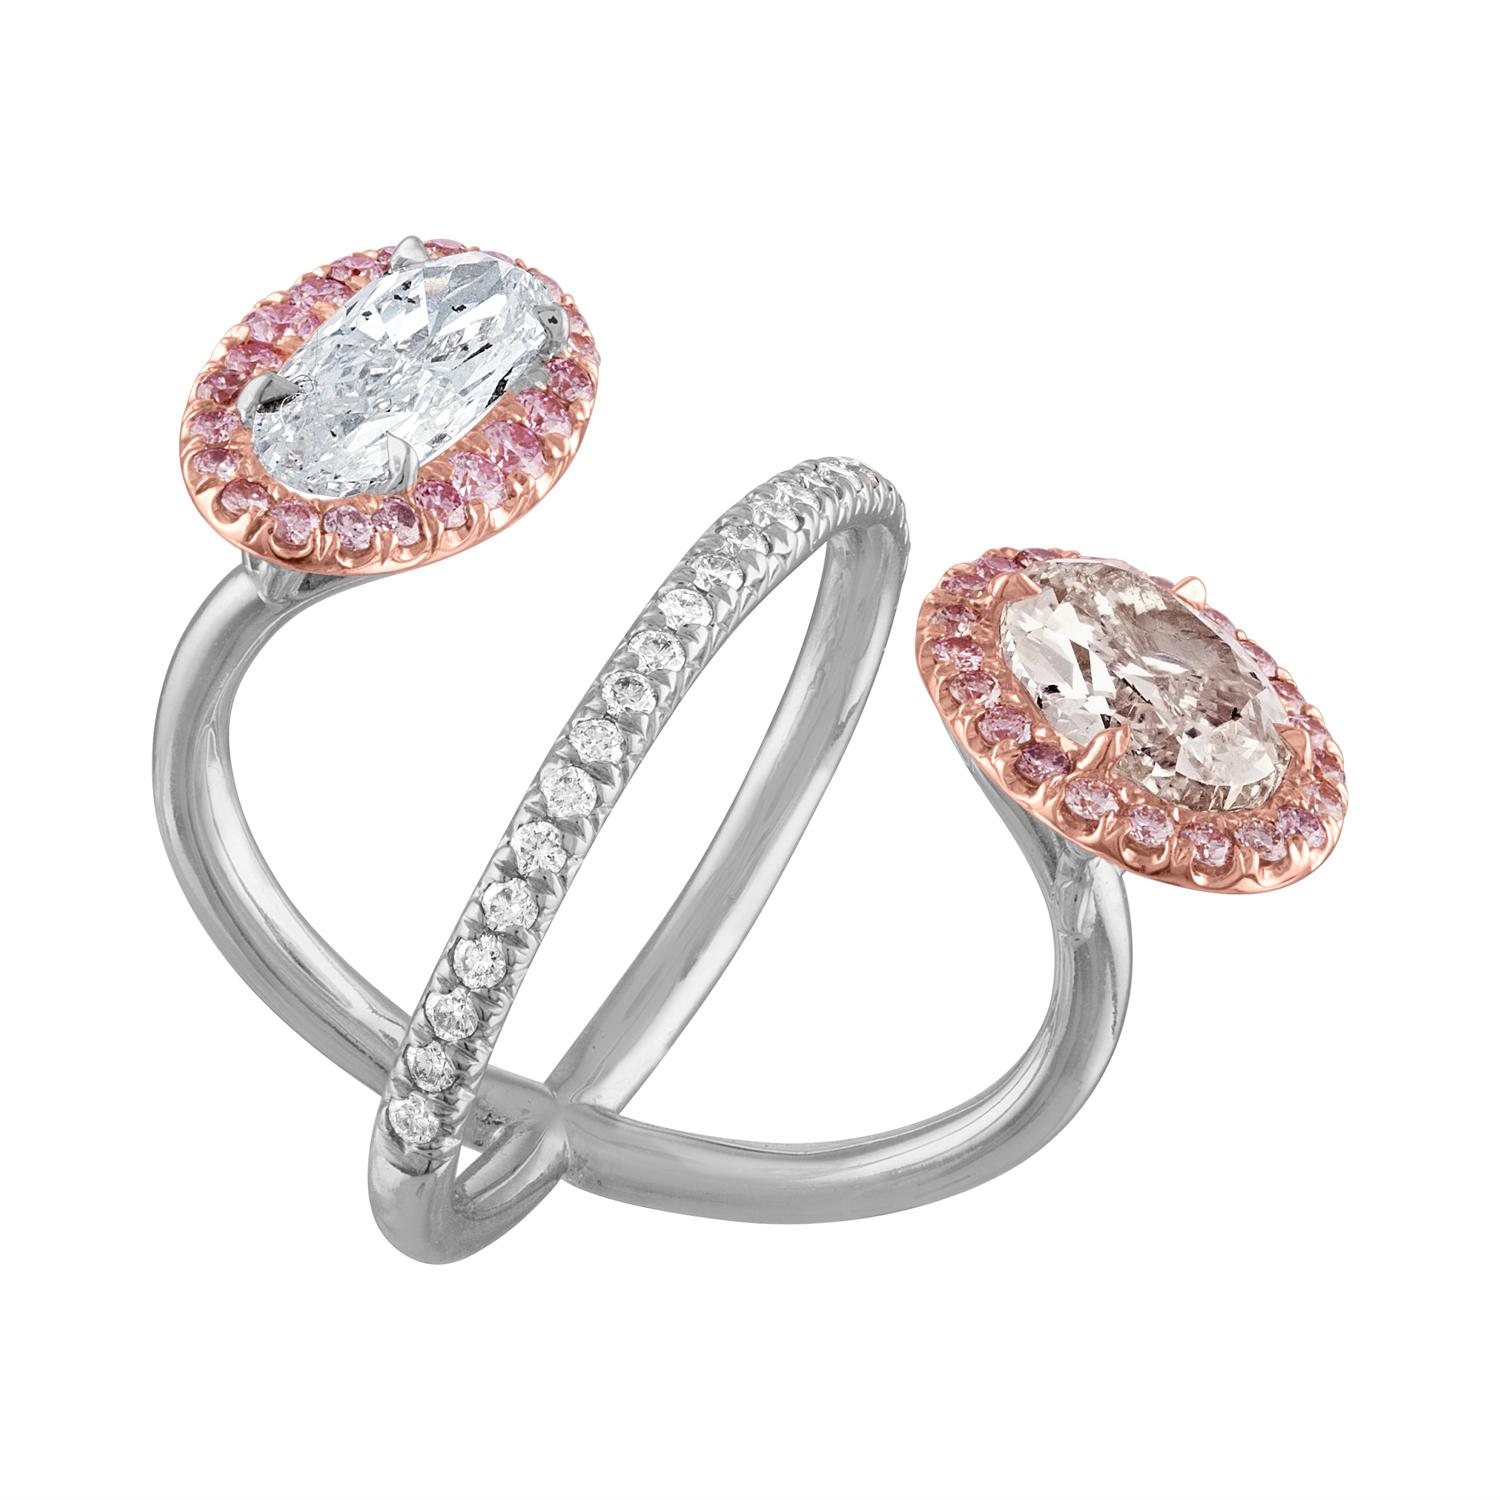 GIA Certified White Oval Diamond and GIA Certified Brown-Pink Diamond Ring